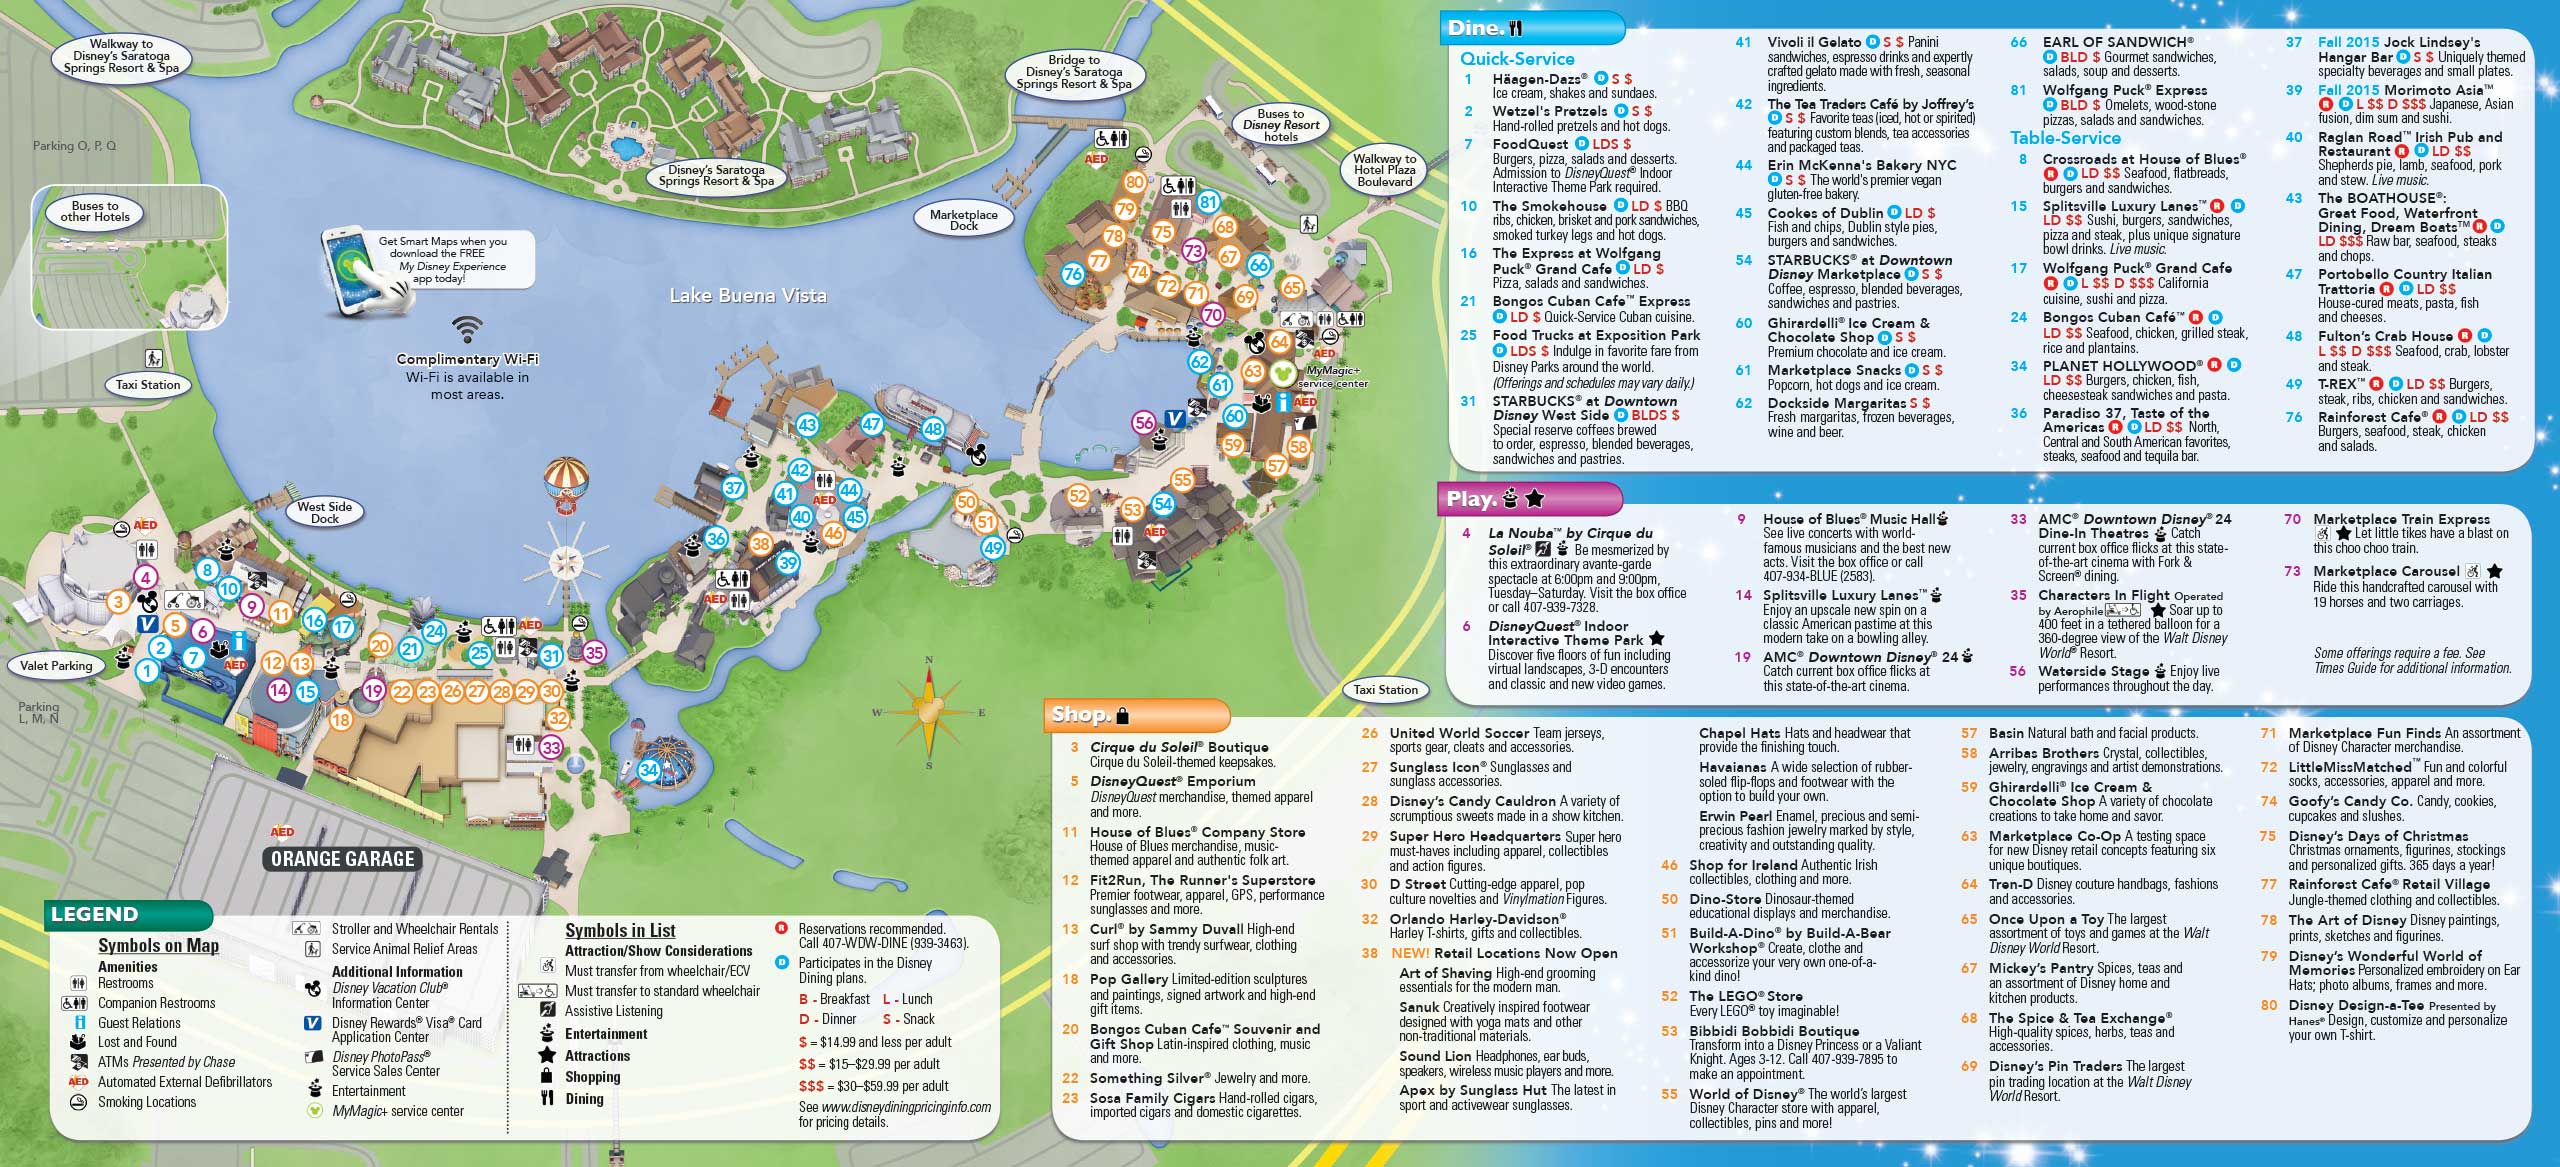 Disney Springs Downtown Disney Guide Map Aug 2015 Photo 2 of 2